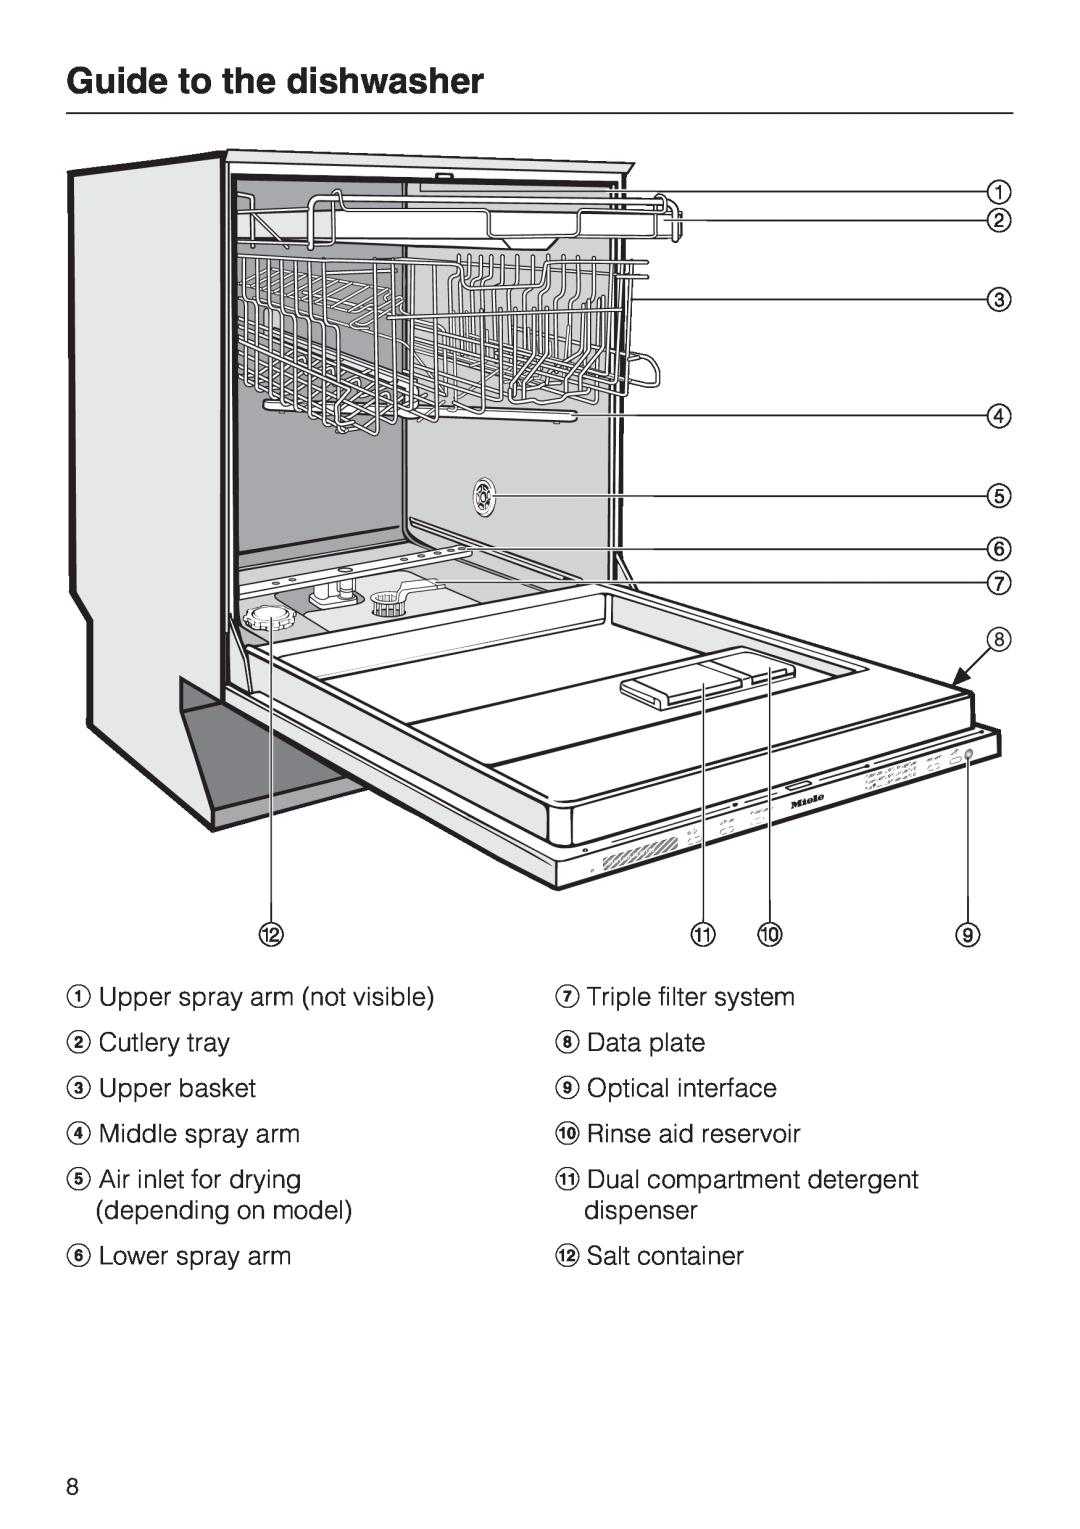 Miele G 5775, G 5770 manual Guide to the dishwasher, Upper spray arm not visible Cutlery tray, Upper basket Middle spray arm 